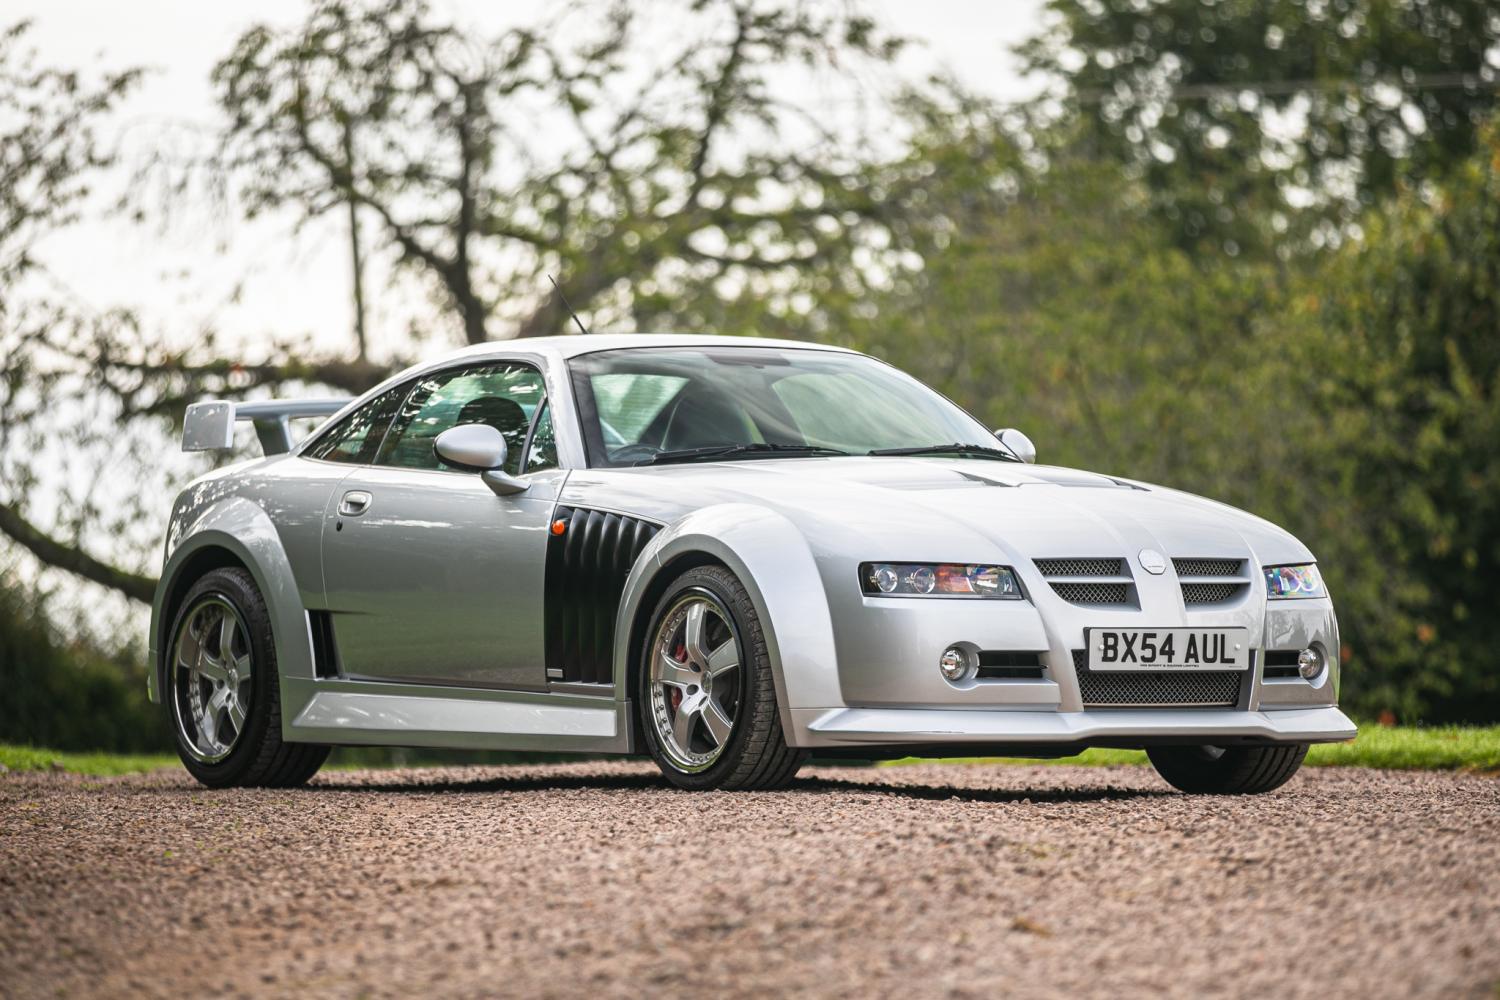 You Could Buy This MG XPower SV-R Instead Of A Porsche Cayman